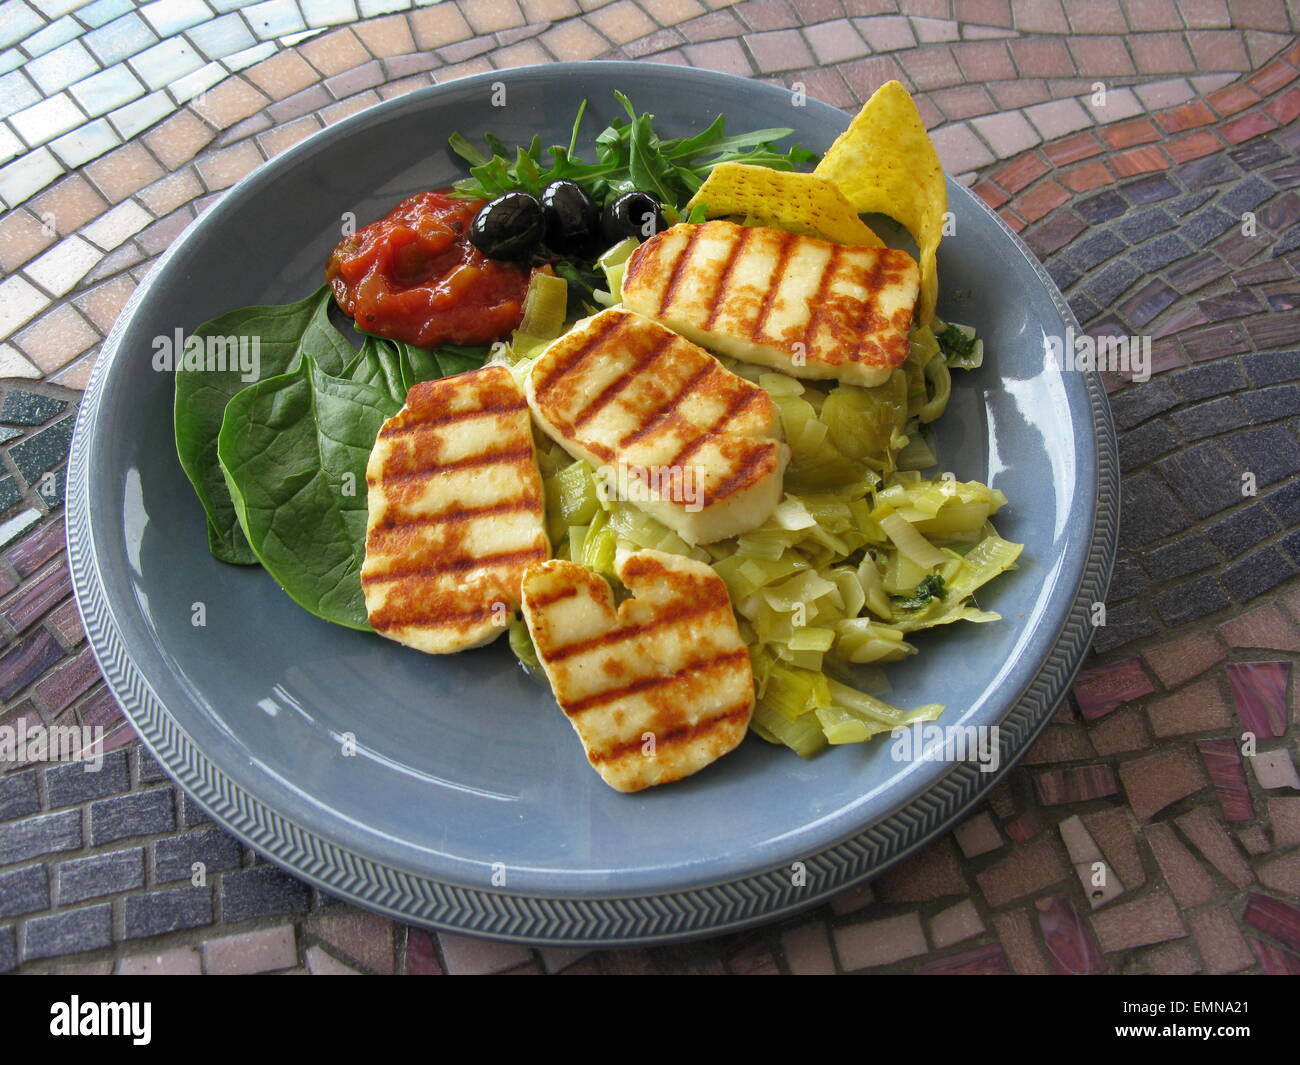 Grilled Halloumi with leeks and salad Stock Photo